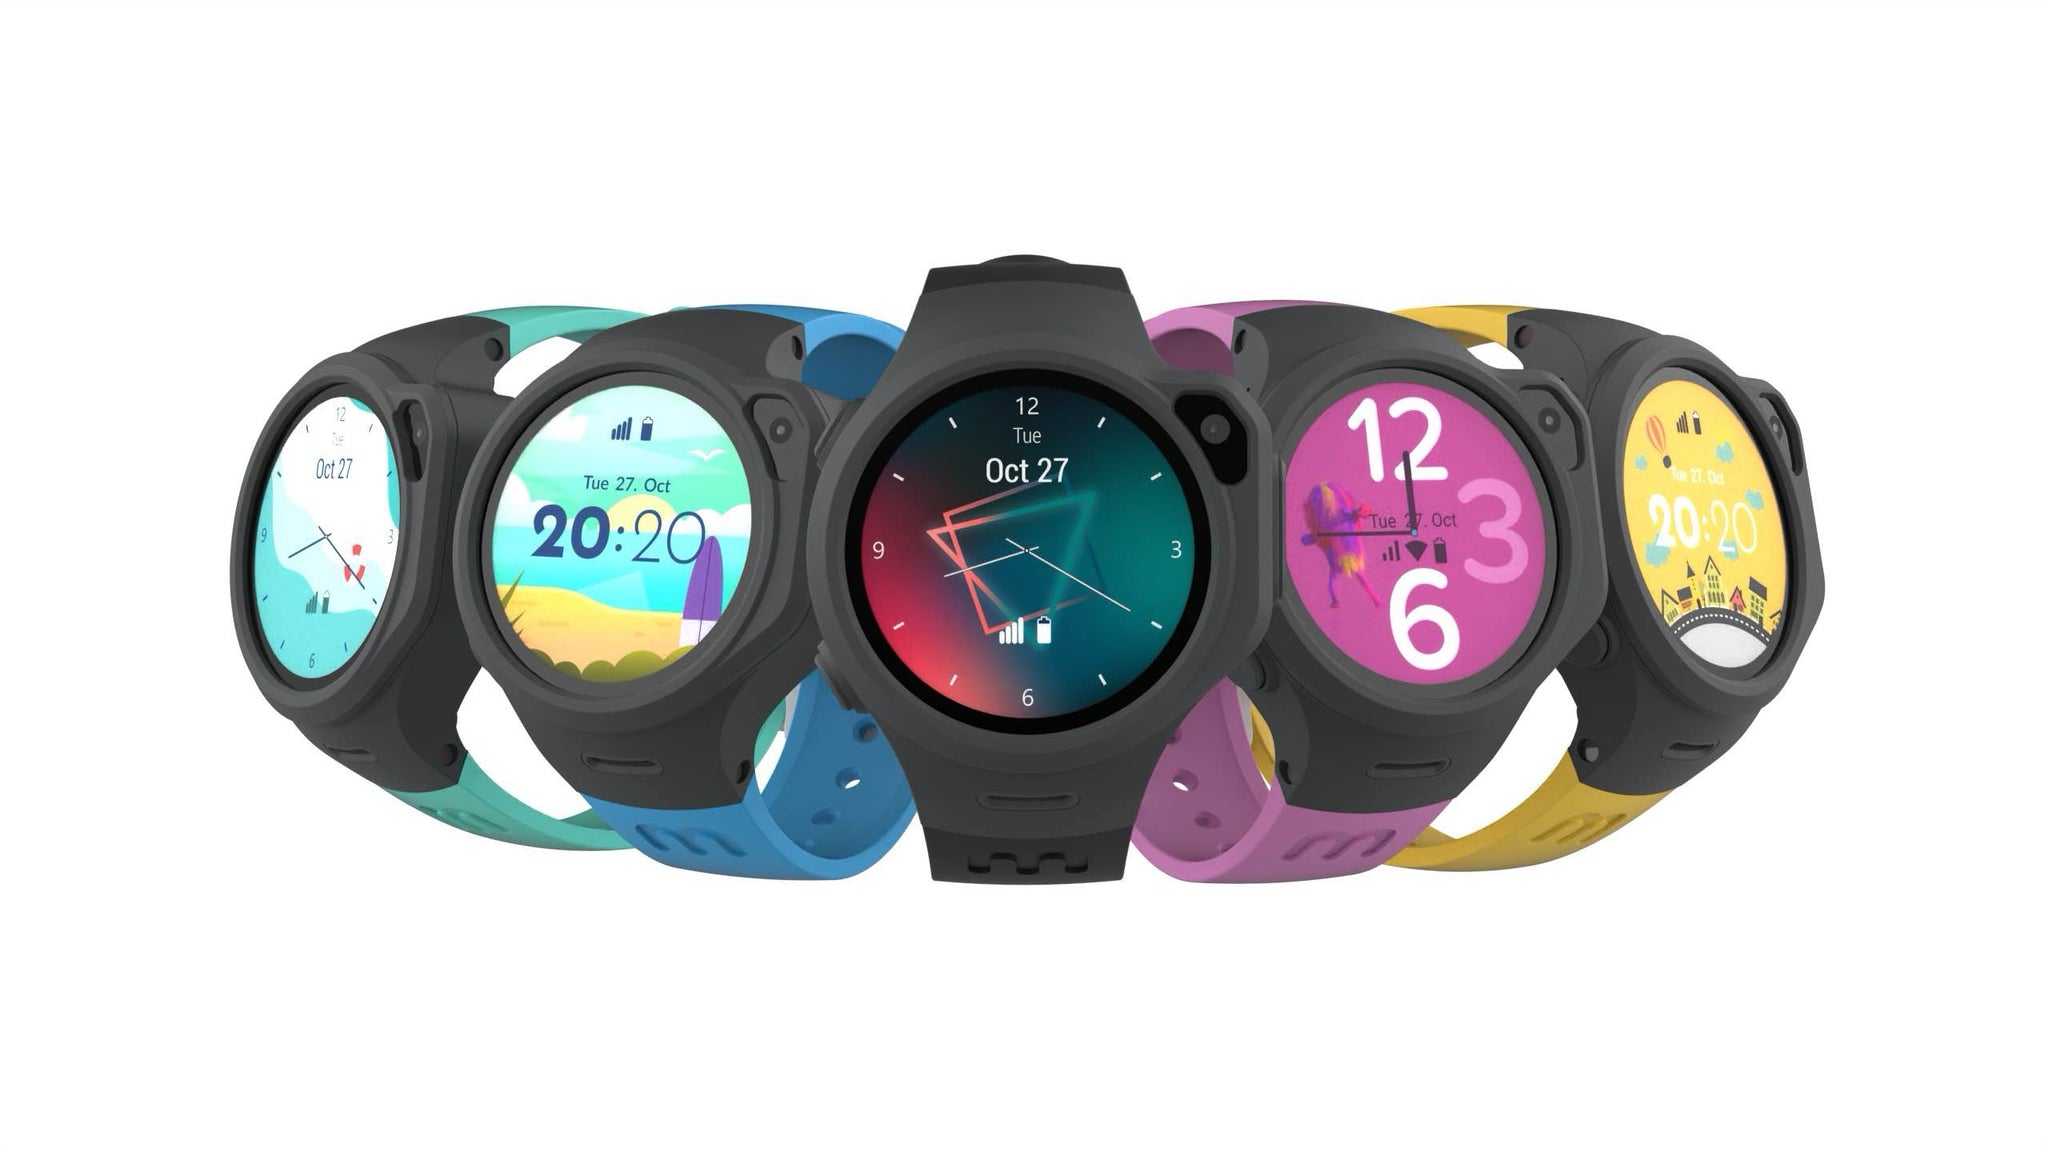 myFirst Fone R1c 4G Music Smartwatch phone with GPS